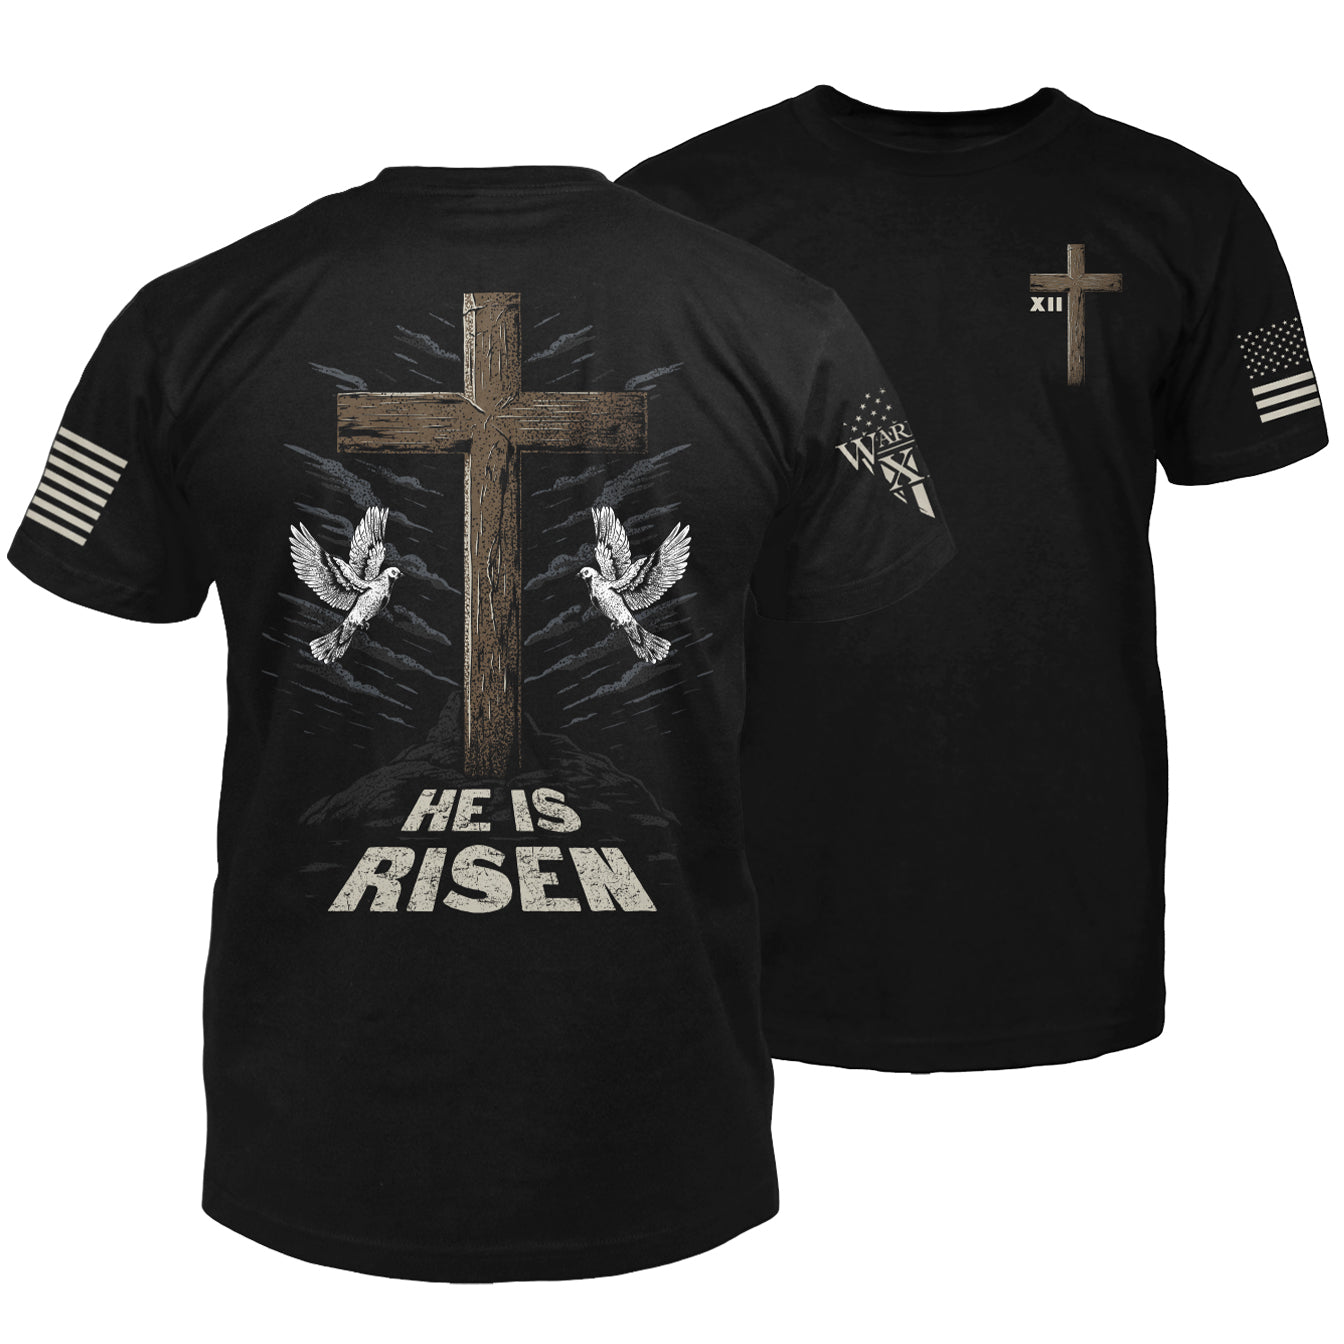 "He Is Risen" is printed on a Black t-shirt with the main design printed on the back and a small print on the front left chest.  This shirt features our brand logo on the right sleeve and the American Flag on the left sleeve.